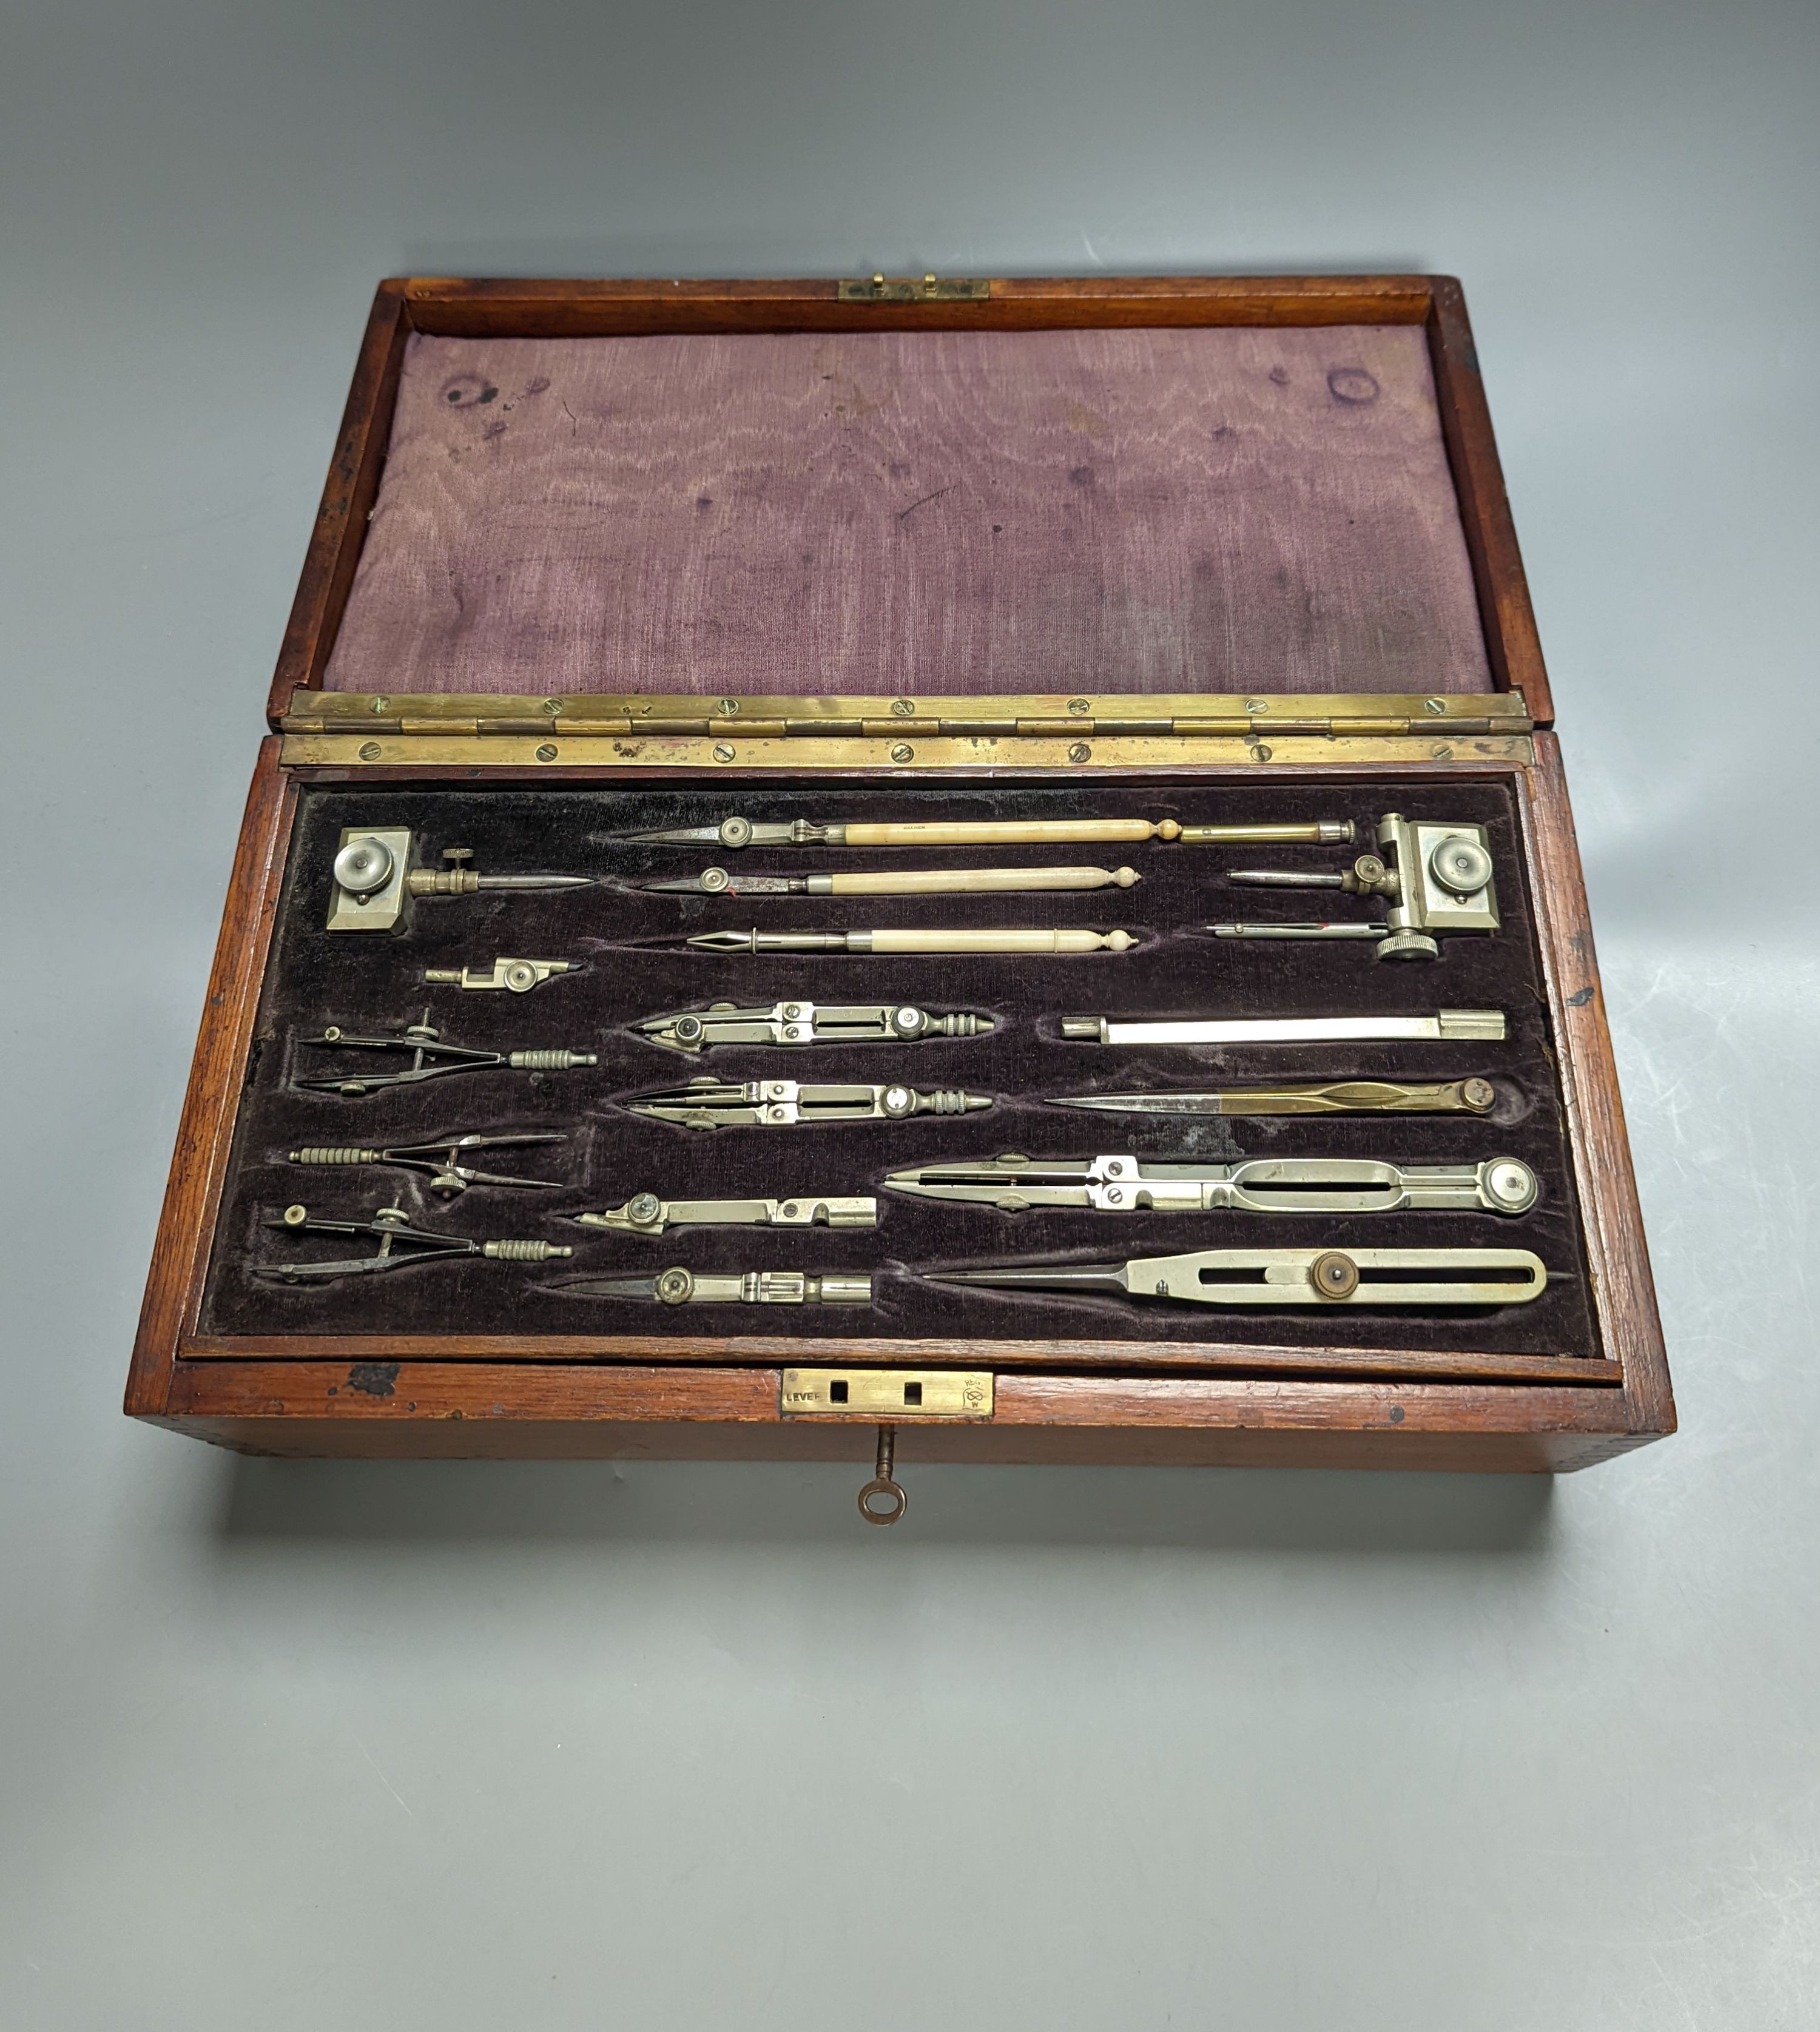 An early 20th century large mahogany case of electrum drawing instruments, wood squares and rulers, 37 x 18.5cm, incomplete